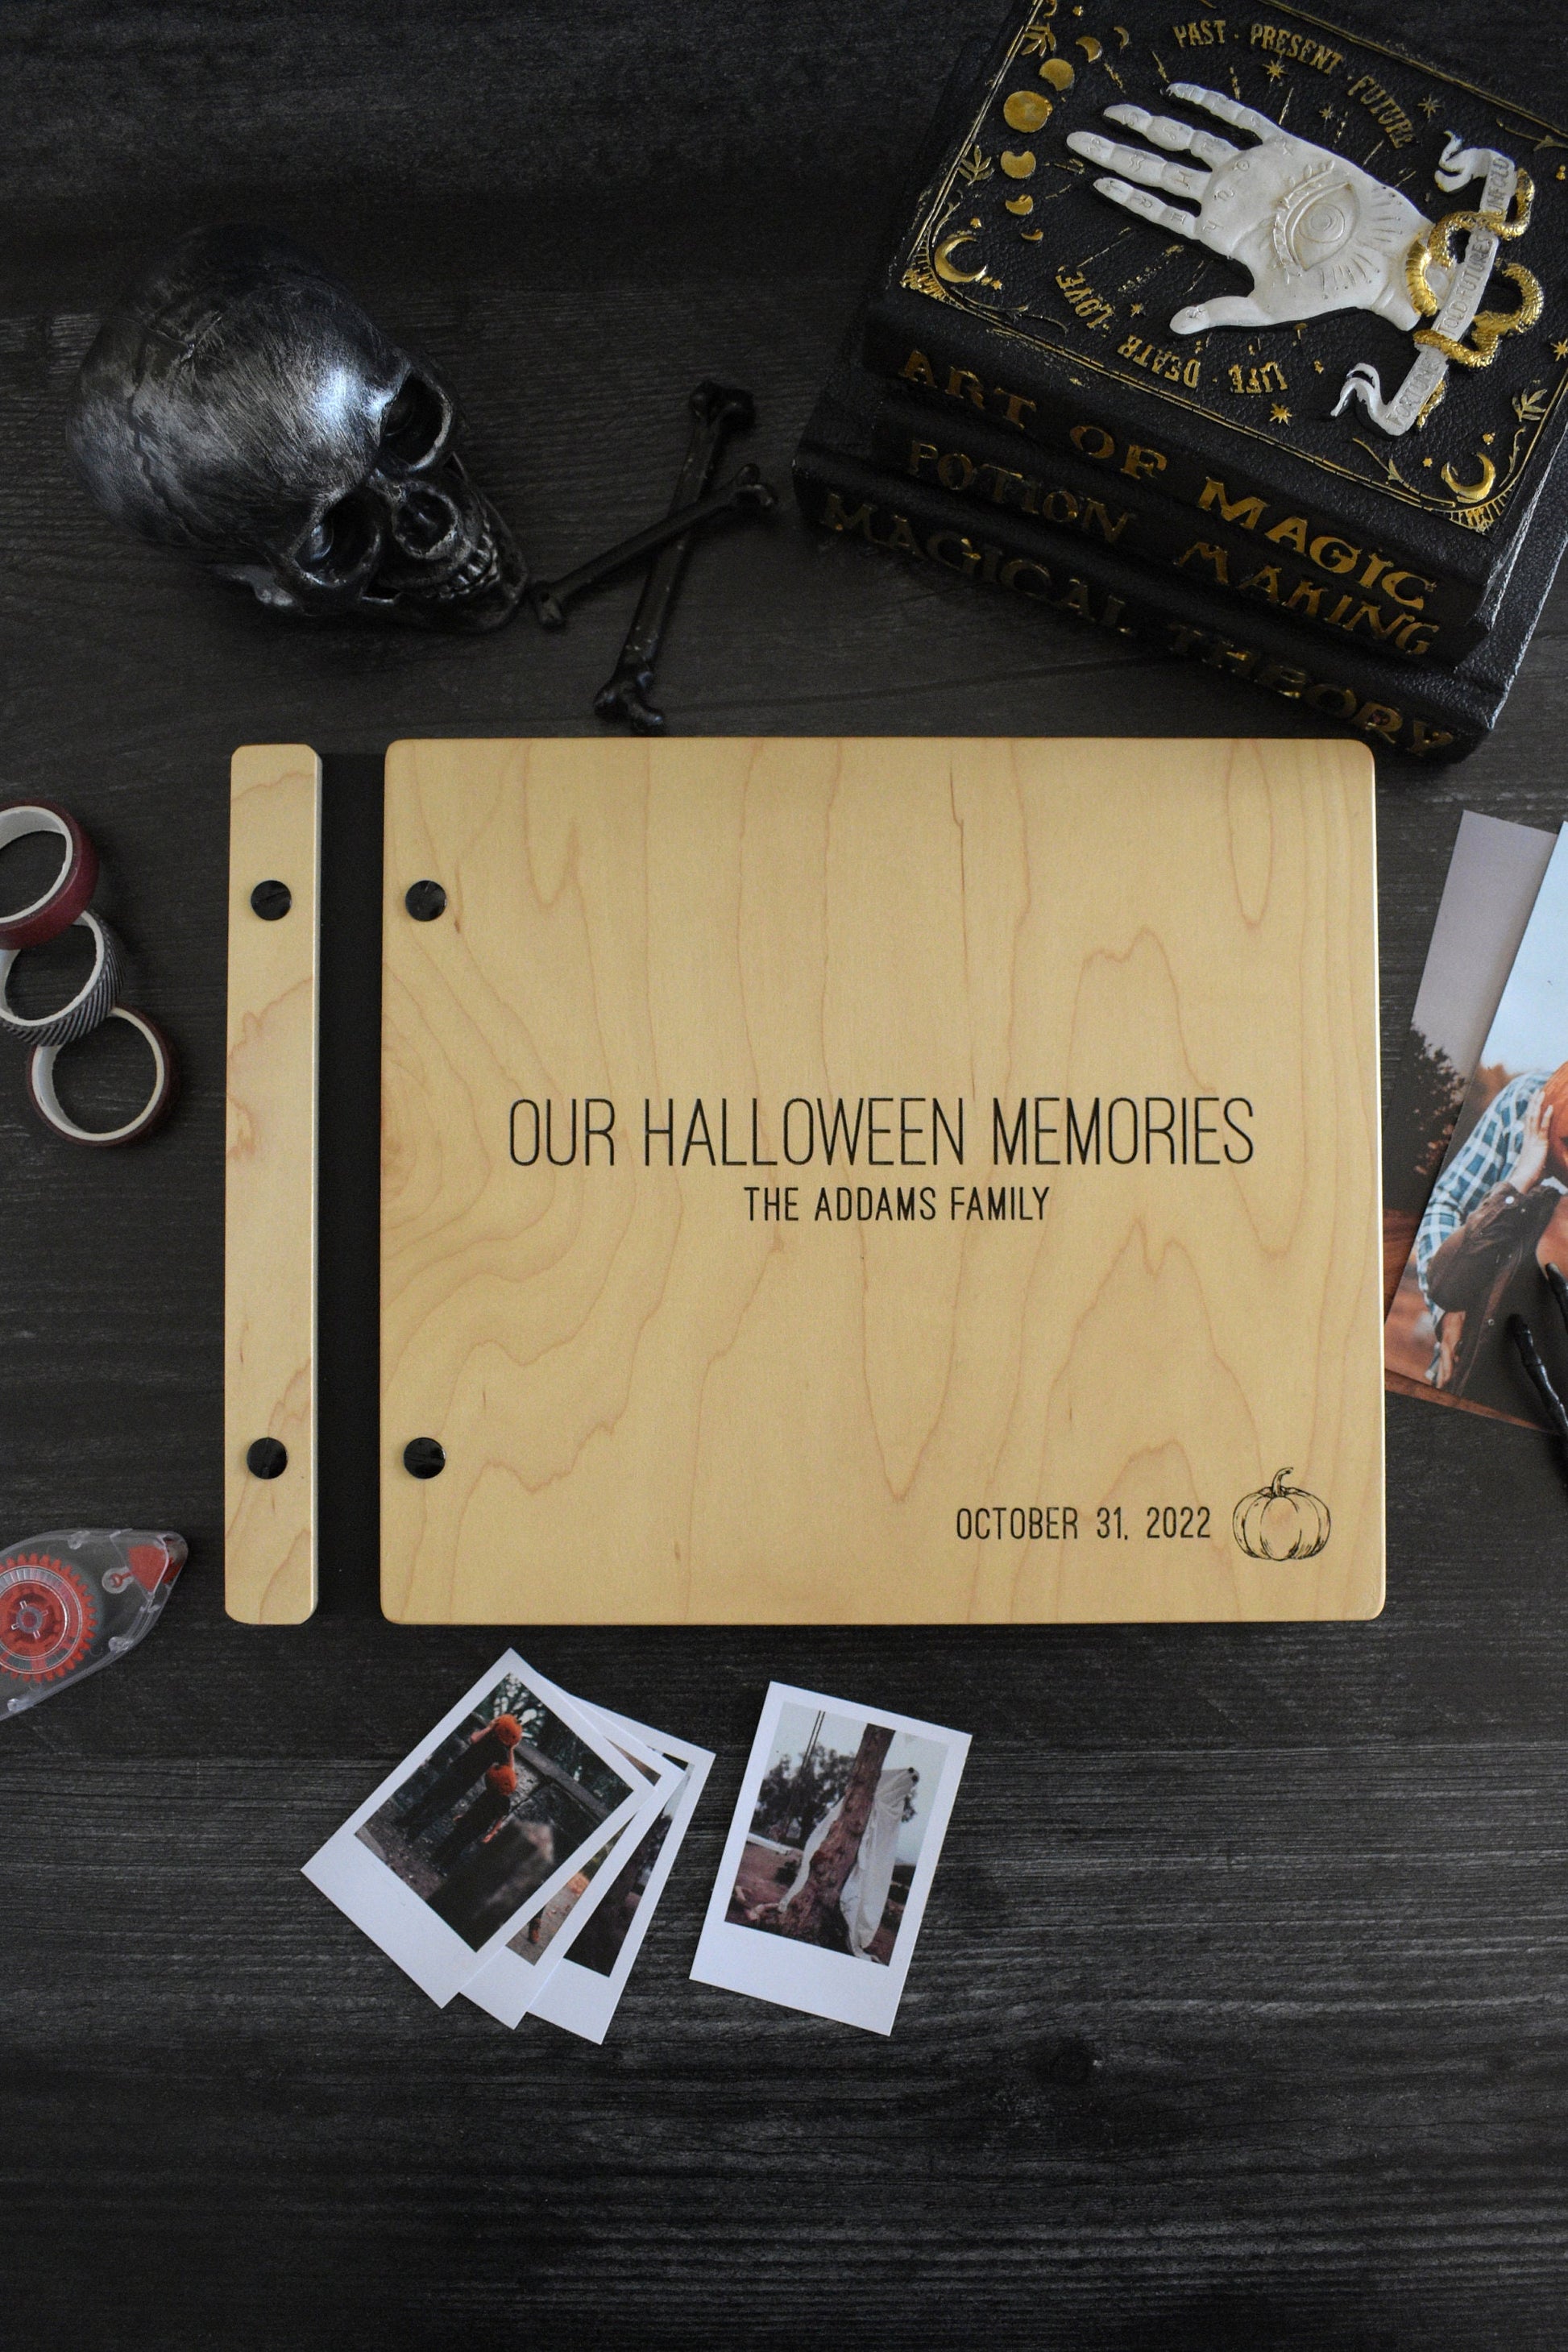 An 8.5x11" guest book lies on a table. Made of maple wood, black vegan leather binding, and black hardware. The front cover reads Our Halloween Memories, The Addams Family, October 31, 2022 with an engraving of a pumpkin in the bottom right corner of the book.